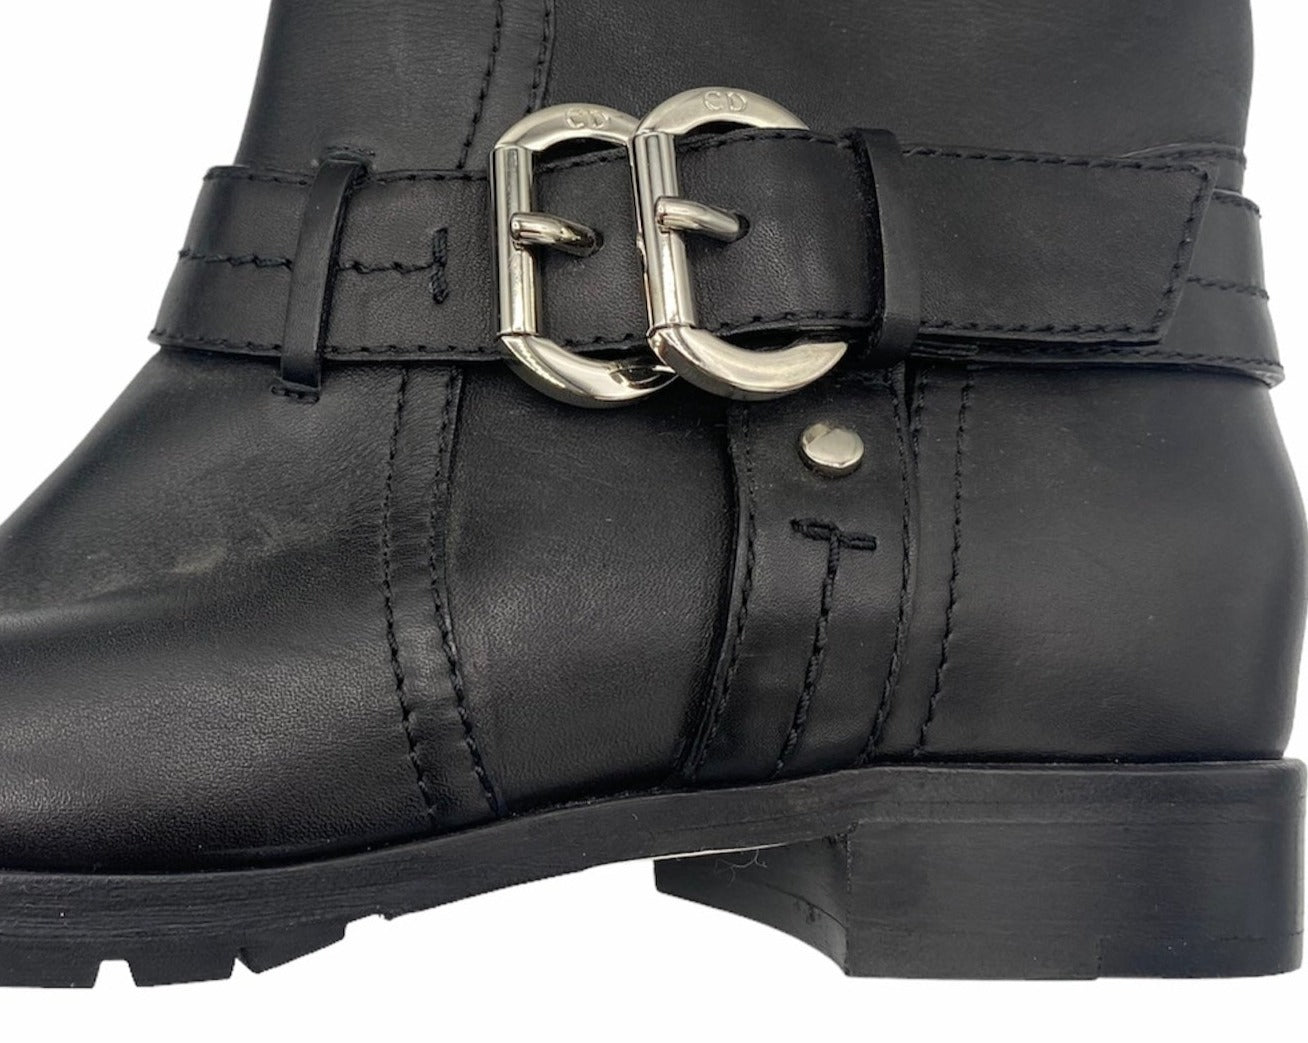 Dior Contemporary Black Leather Motorcycle Boots DETAIL 3 of 5